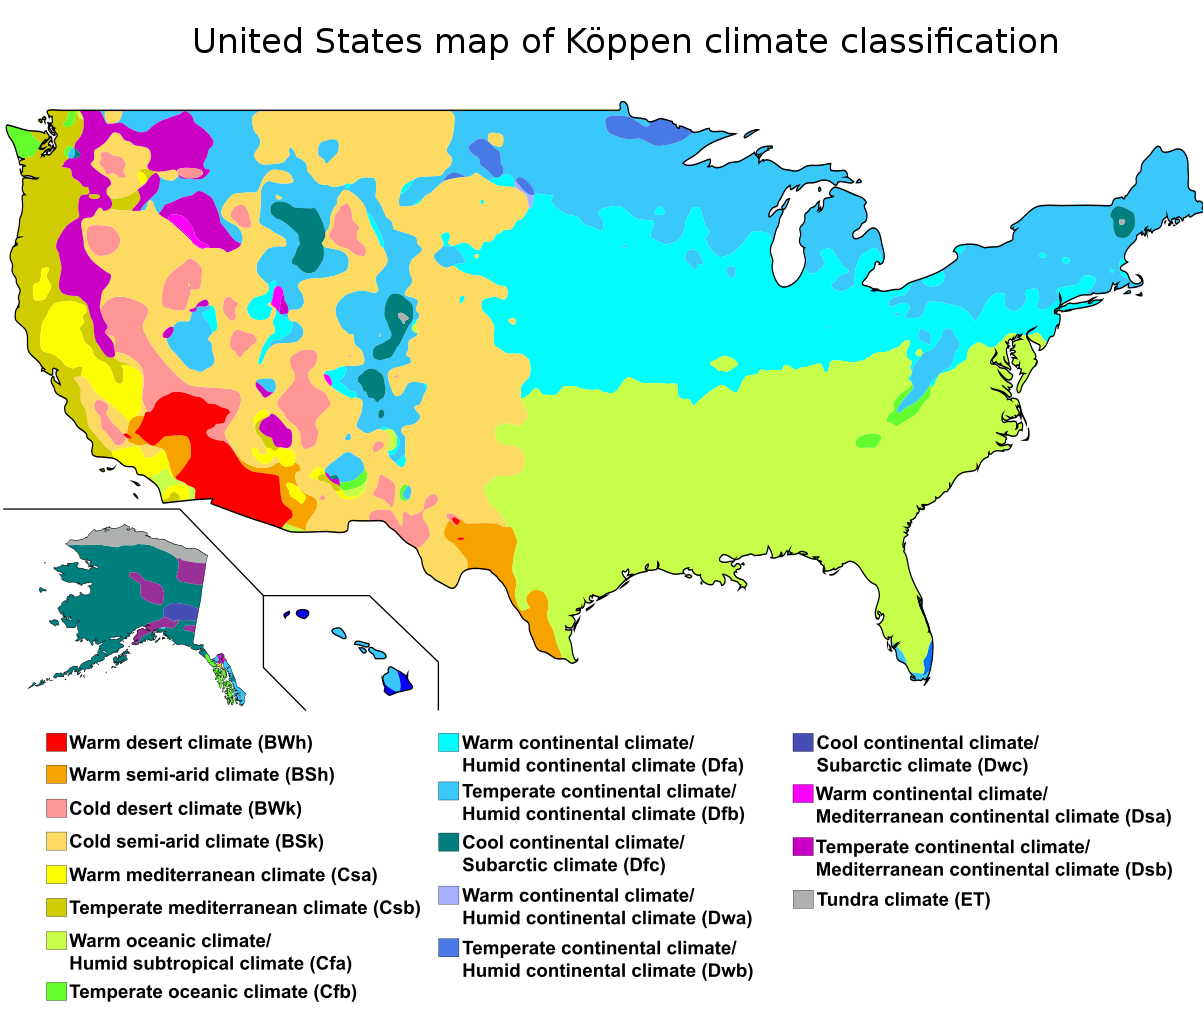 USA map of climate conditions